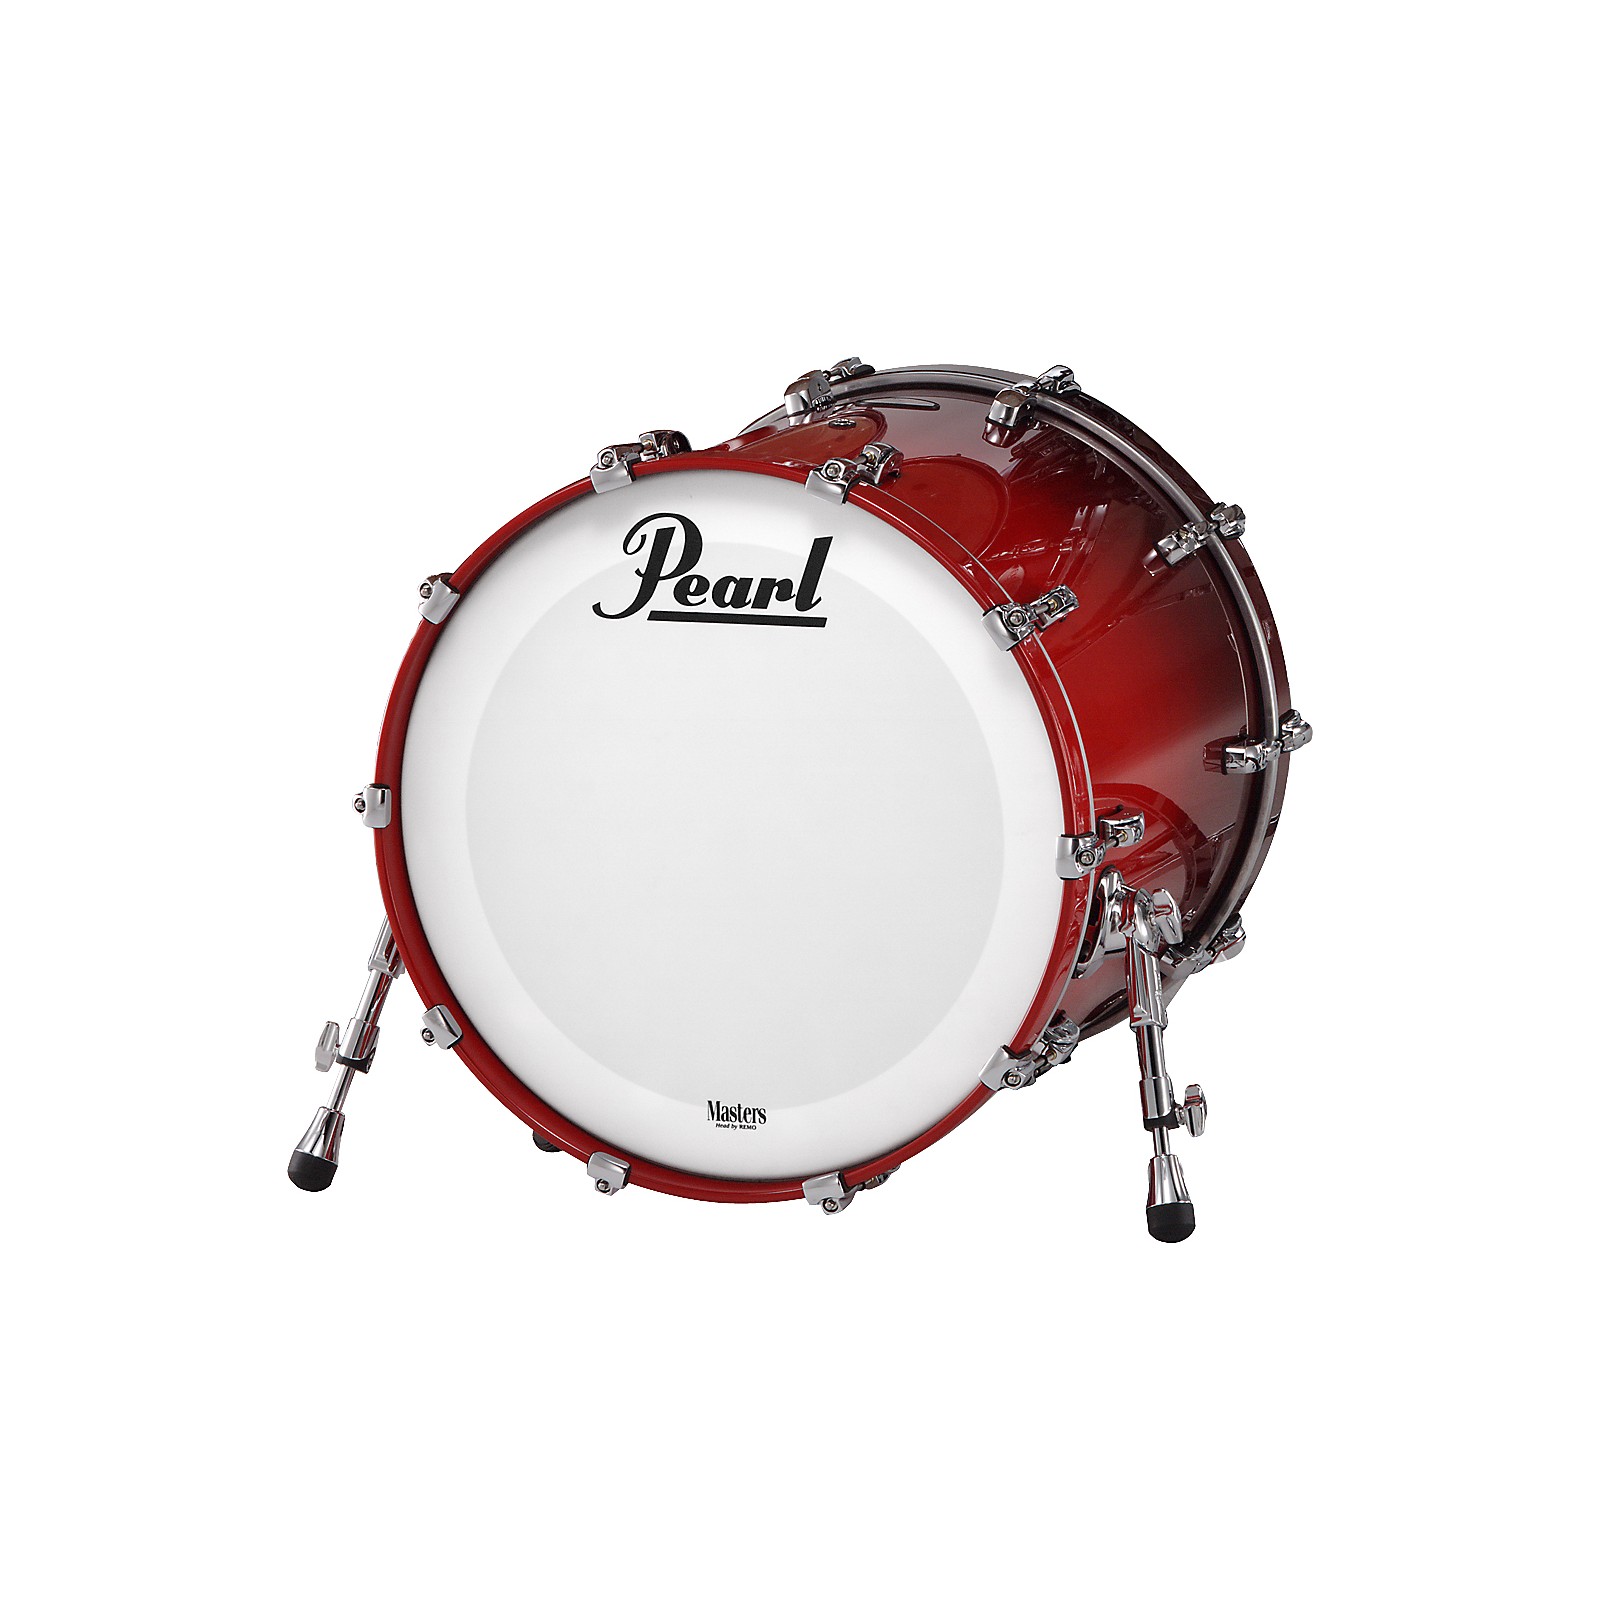 Pearl Reference Bass Drum Scarlet Fade 24 x 18 in. | Musician's Friend